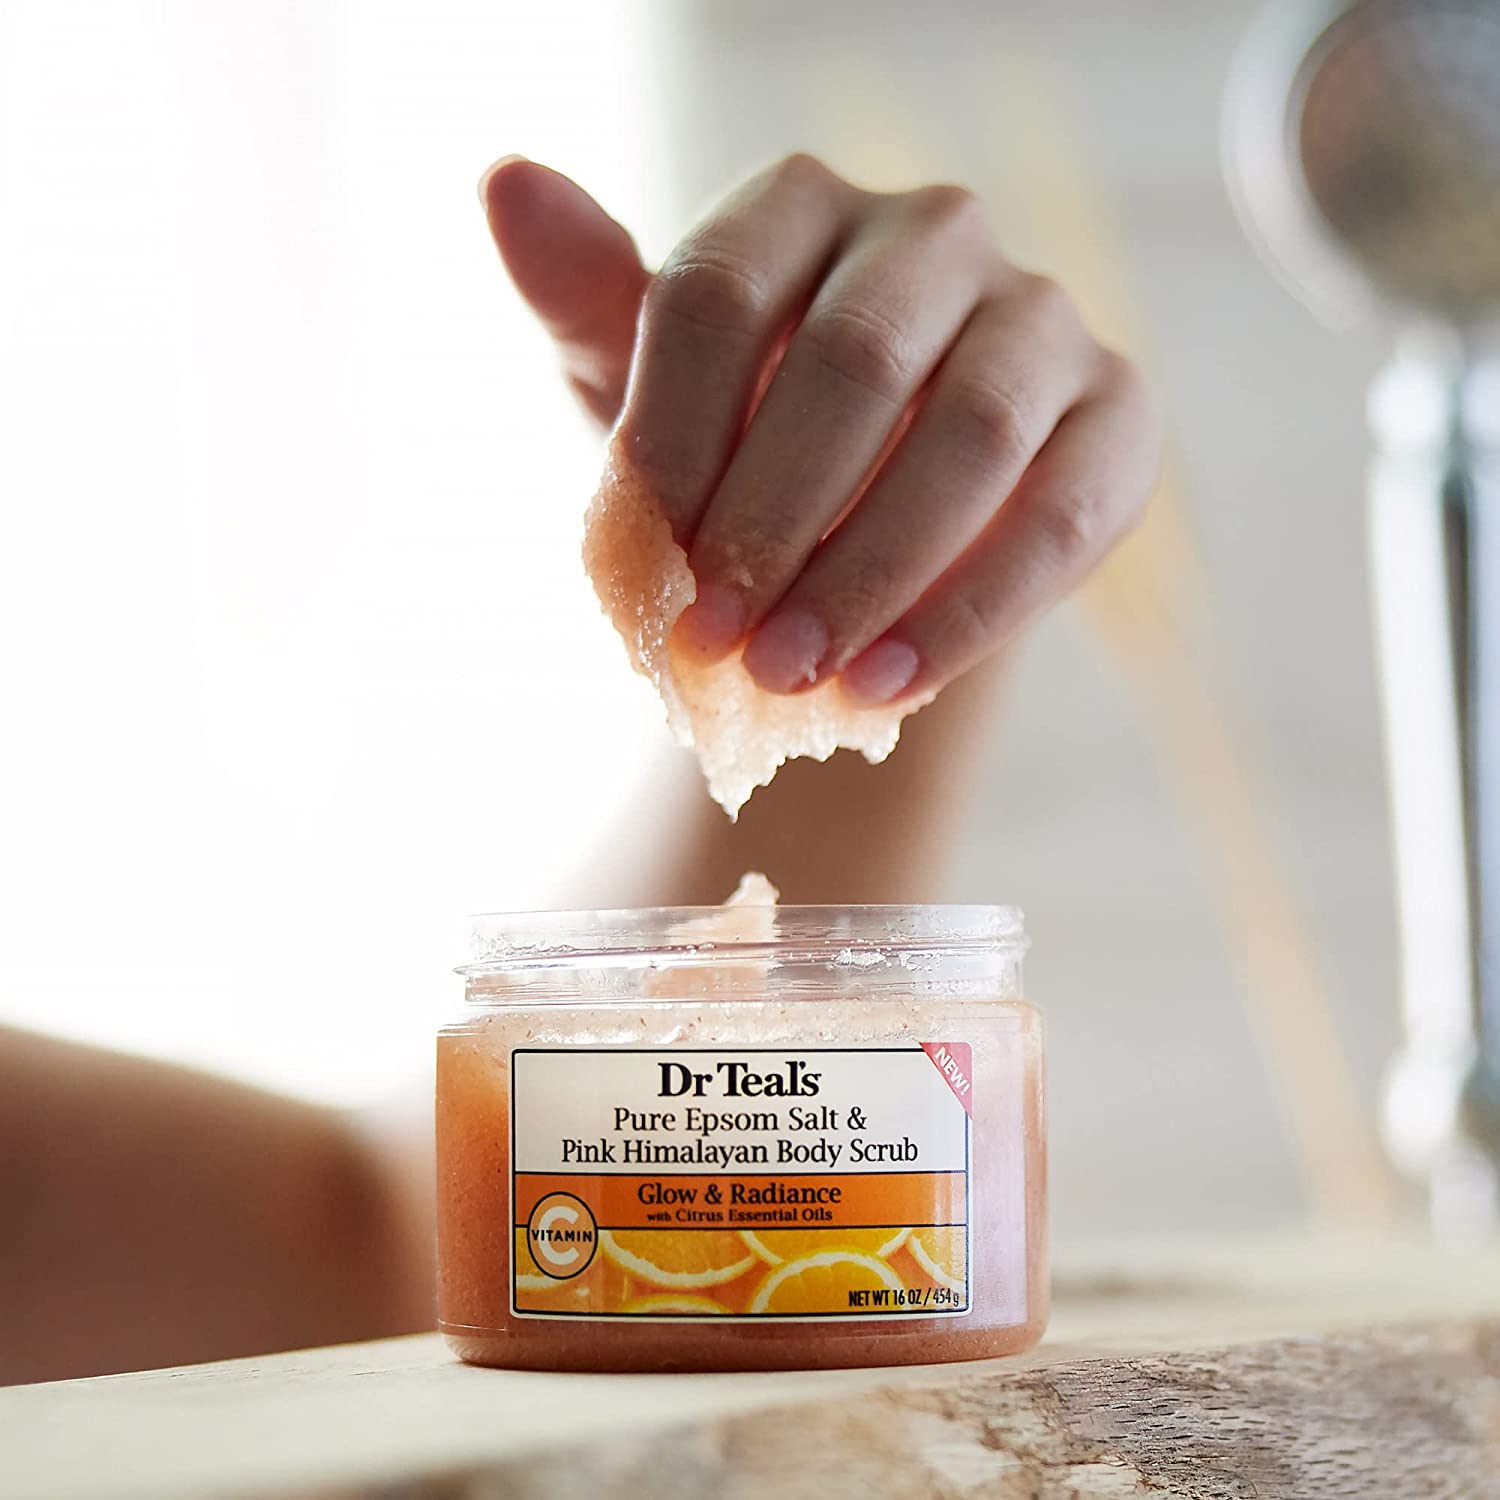 Dr Teal's Pink Himalayan Salt Glow & Radiance With Pure Epsom Salts & Citrus Essential Oils Body Scrub (454g) Dr Teal's